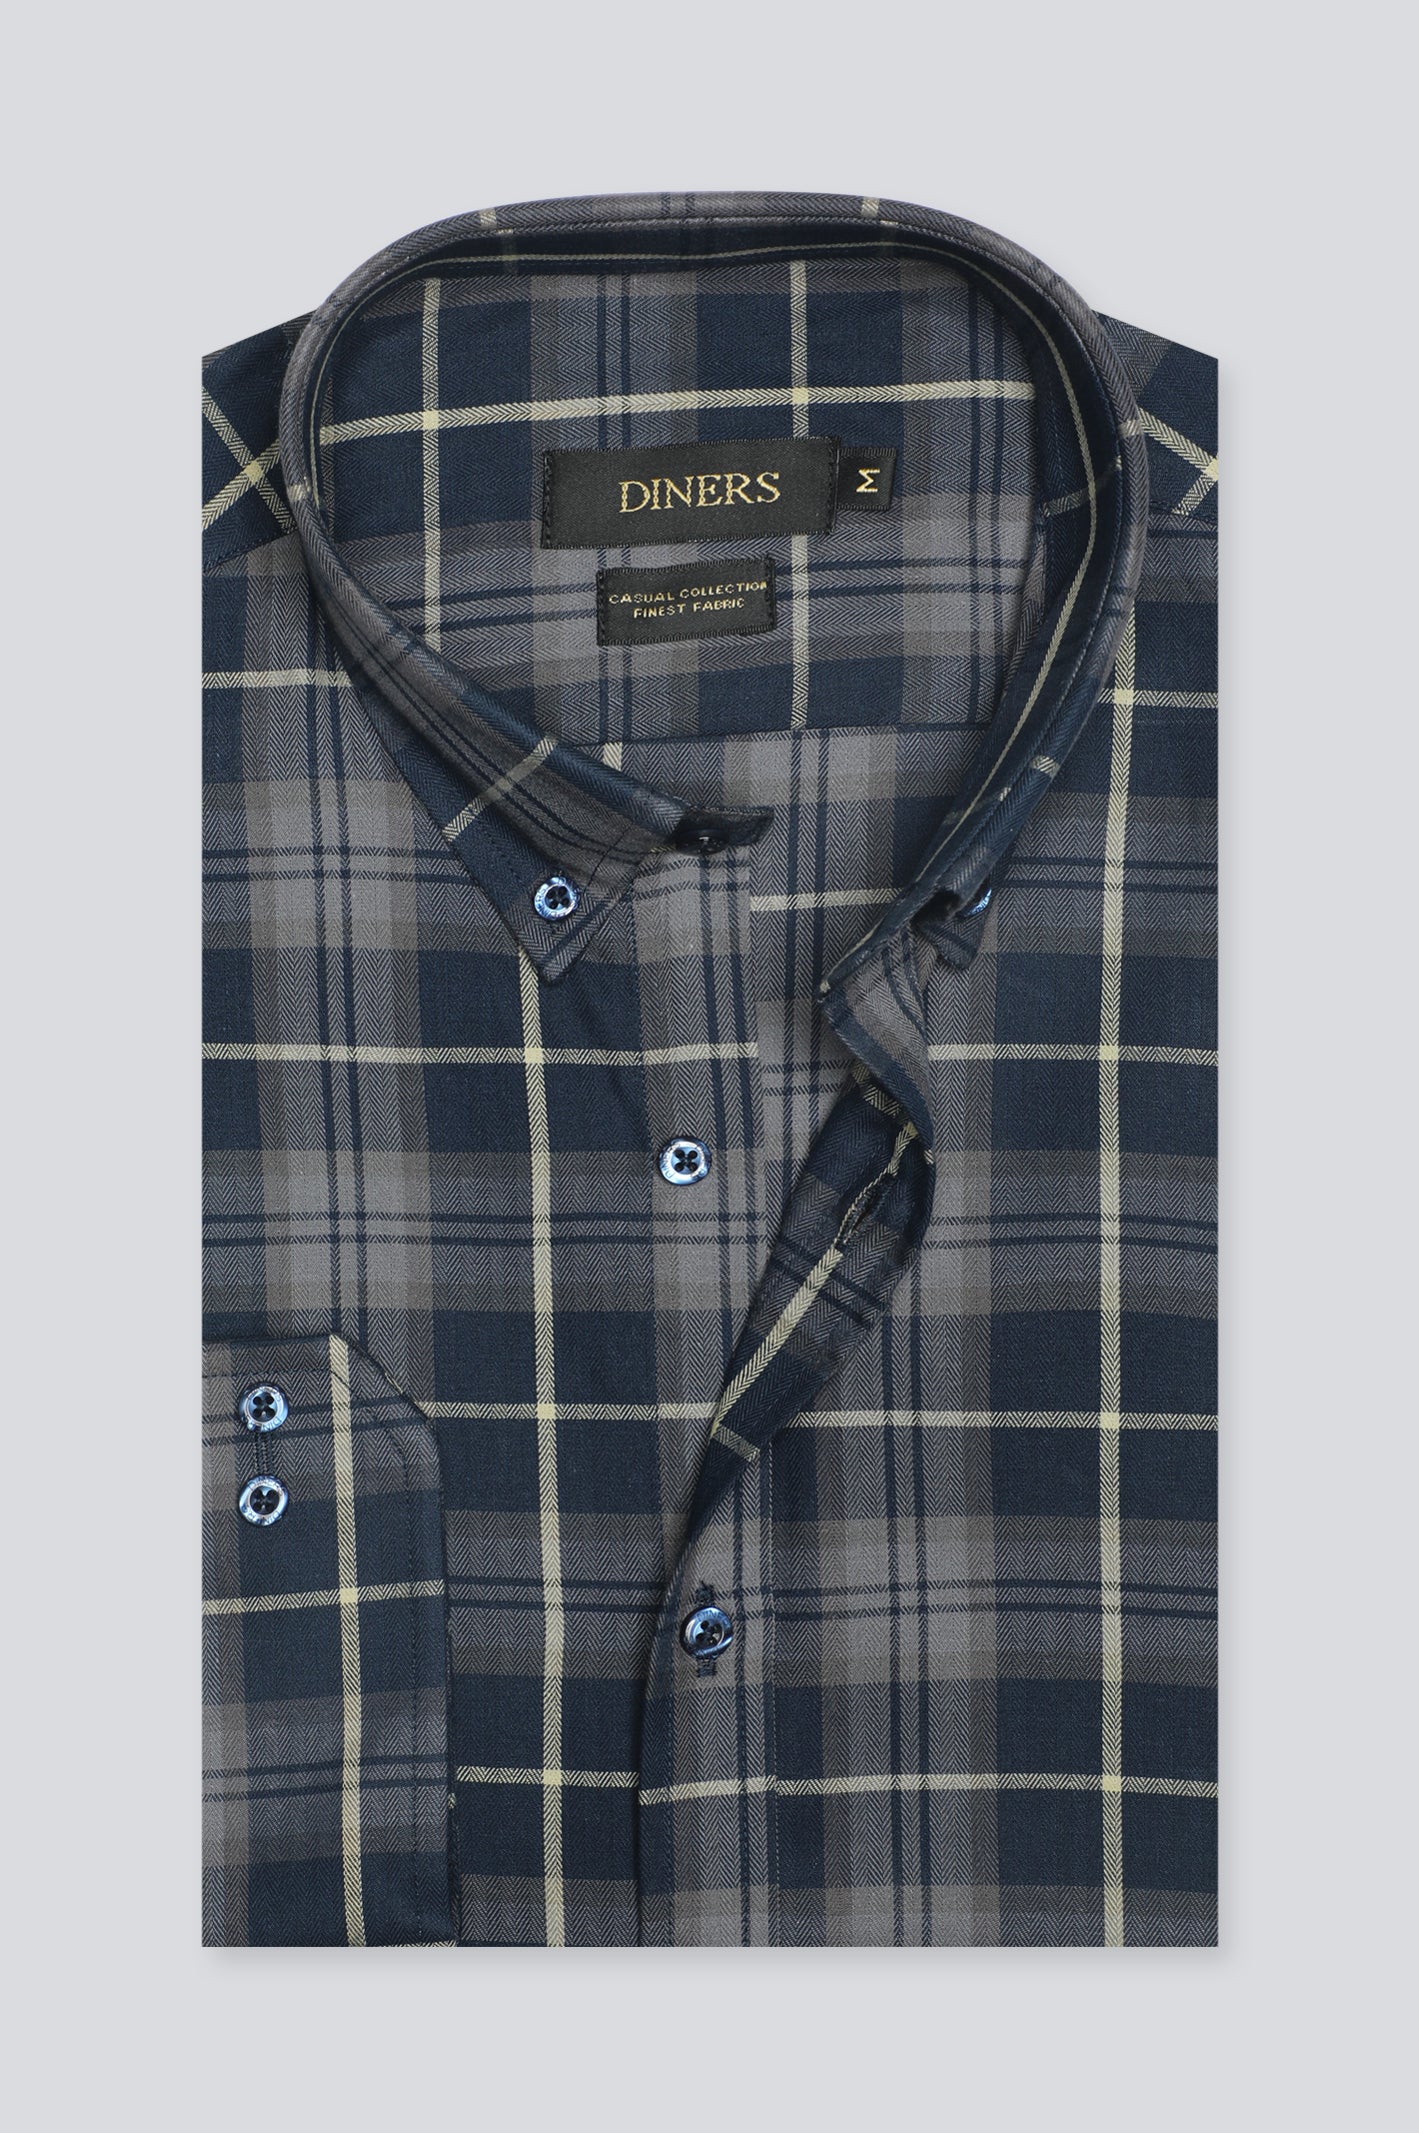 Grey Tattersall Check Casual Shirt From Diners